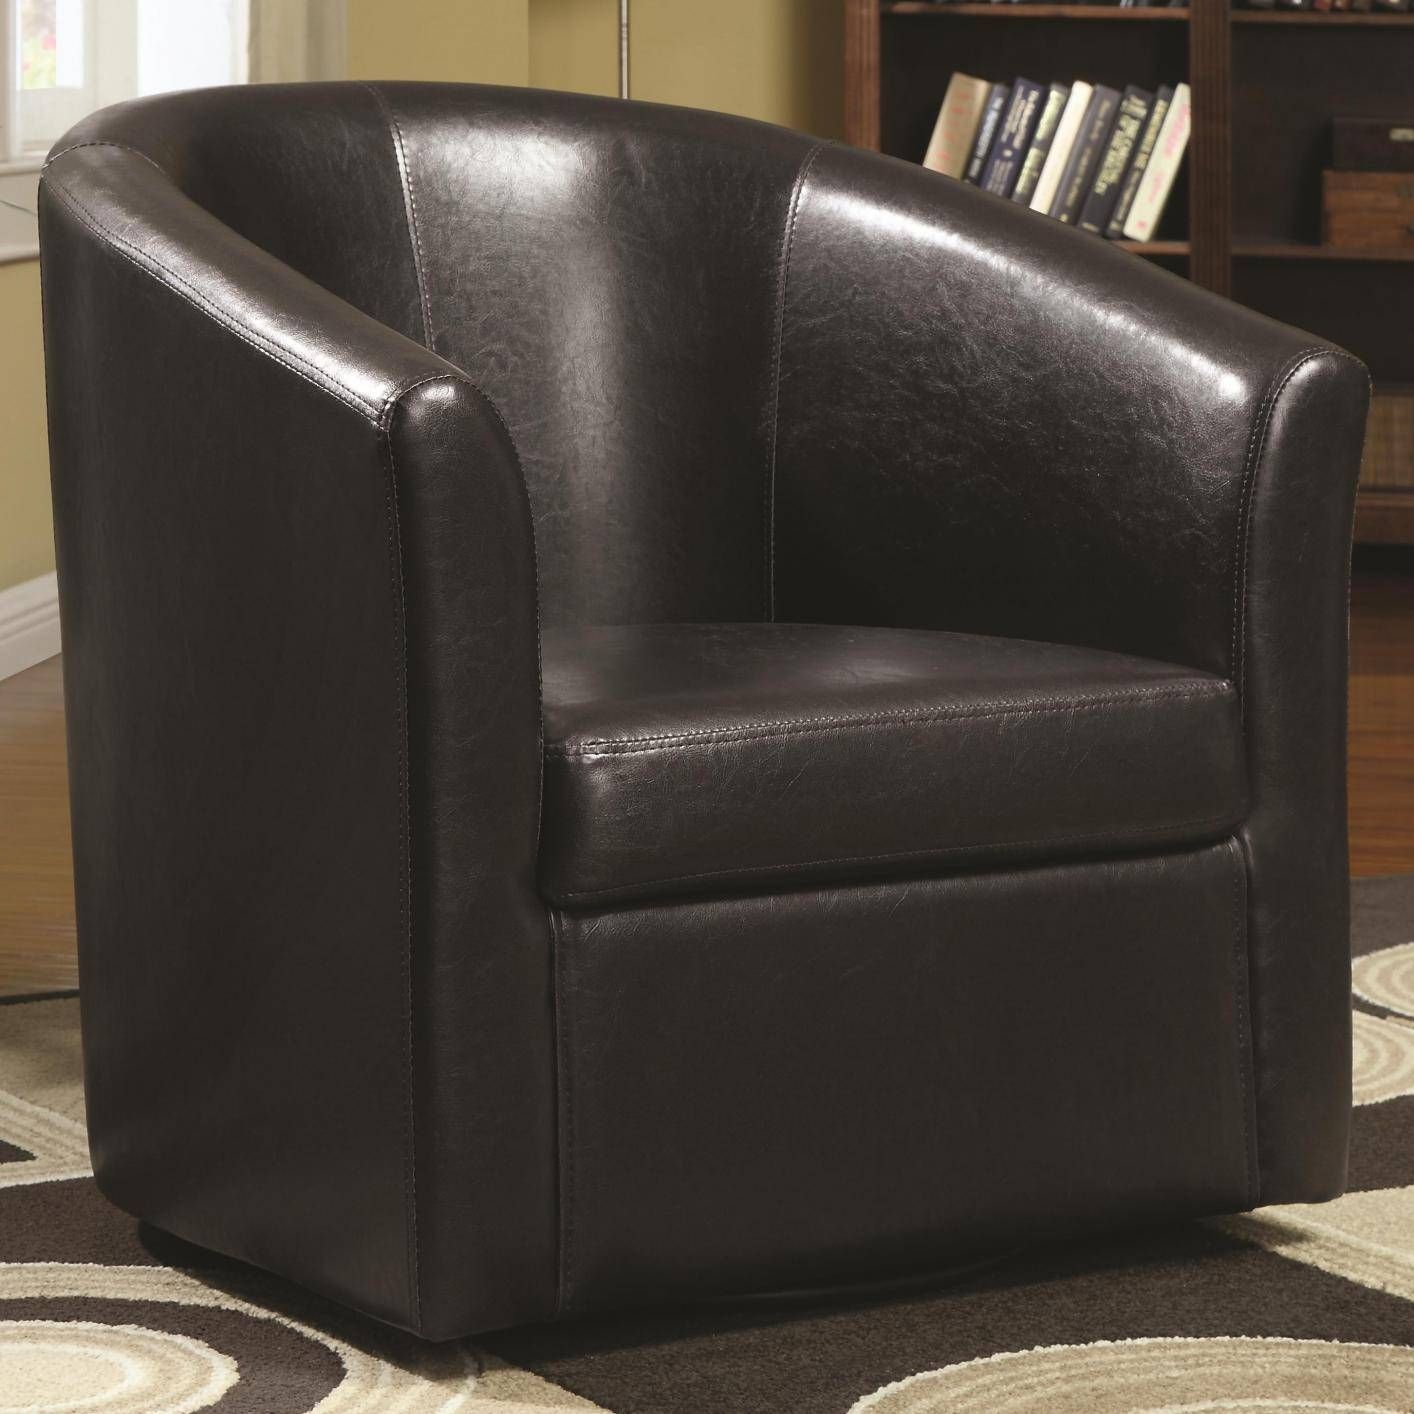 Coaster 902098 Brown Leather Swivel Chair – Steal A Sofa Furniture For Sofa With Swivel Chair (Photo 28 of 30)